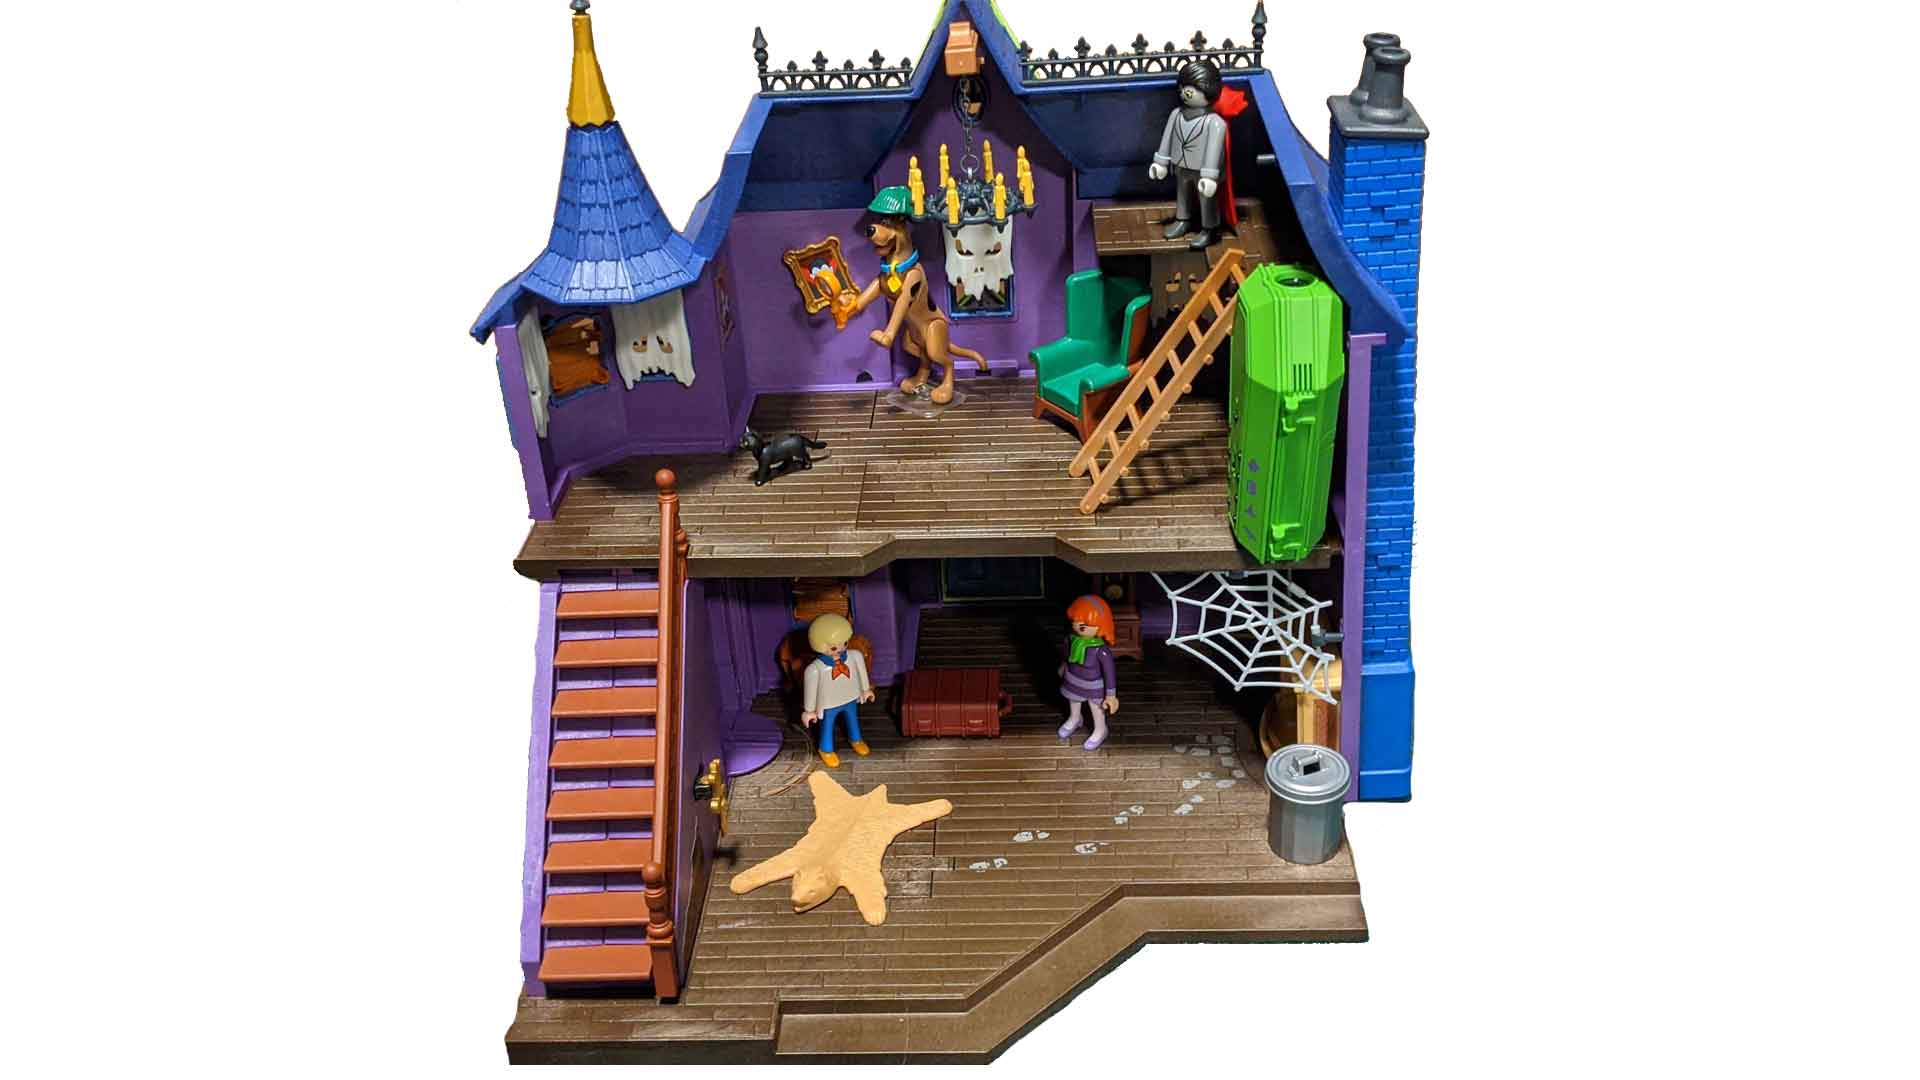 Playmobil Scooby-Doo Adventure in the Mystery Mansion interior